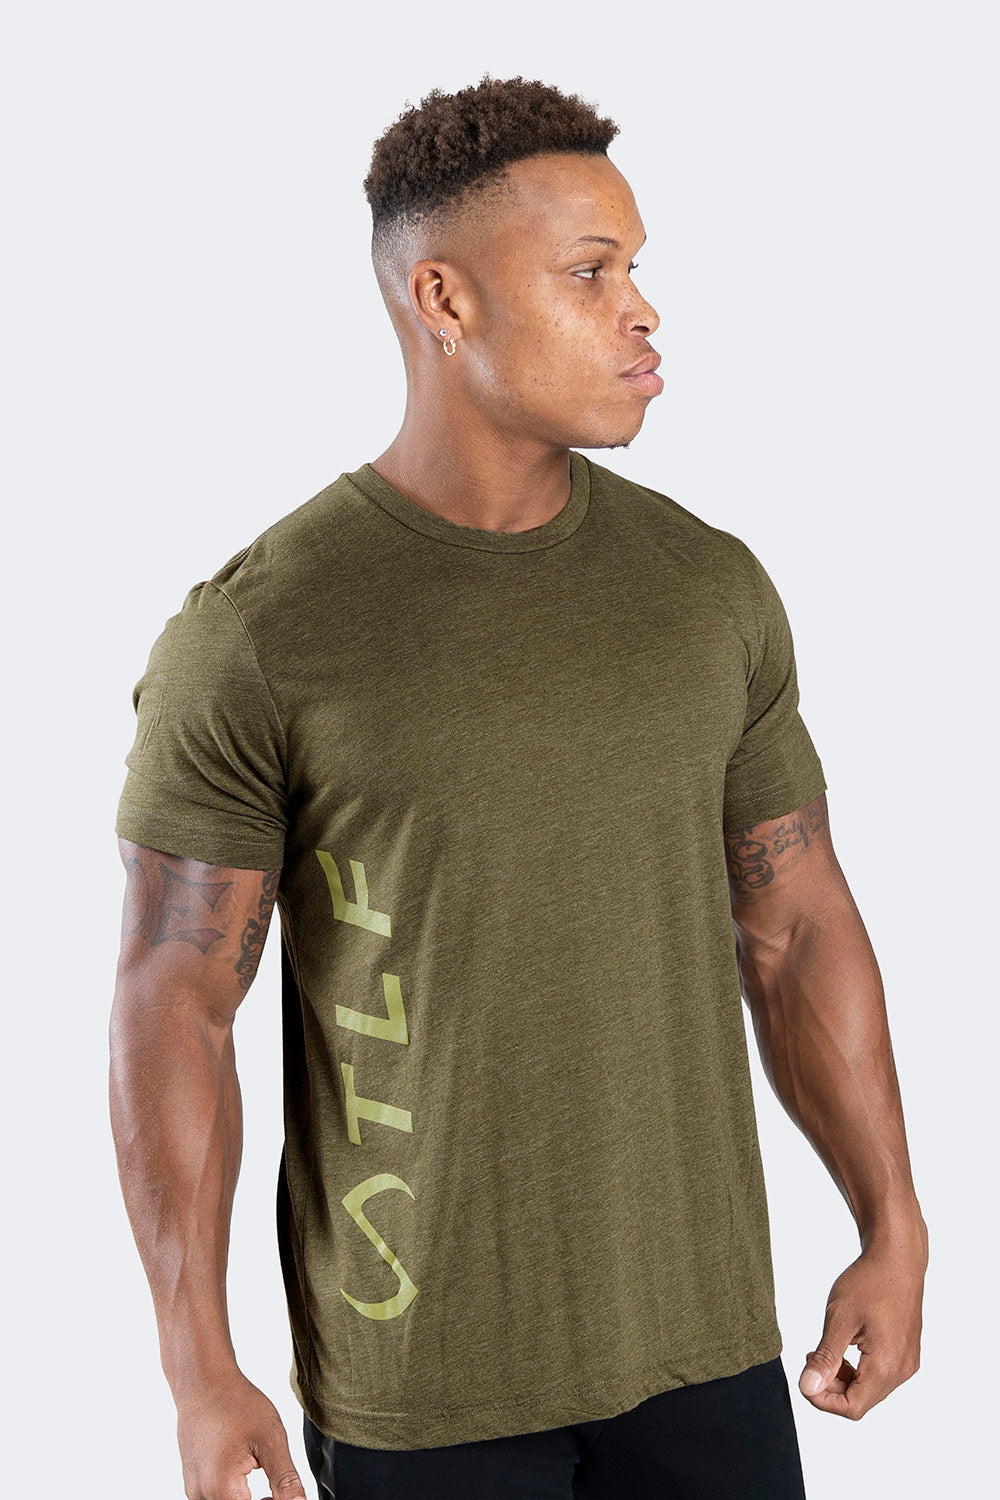 TLF Elevate T-Shirt - GRAPHIC T-SHIRTS - TLF Apparel | Take Life Further